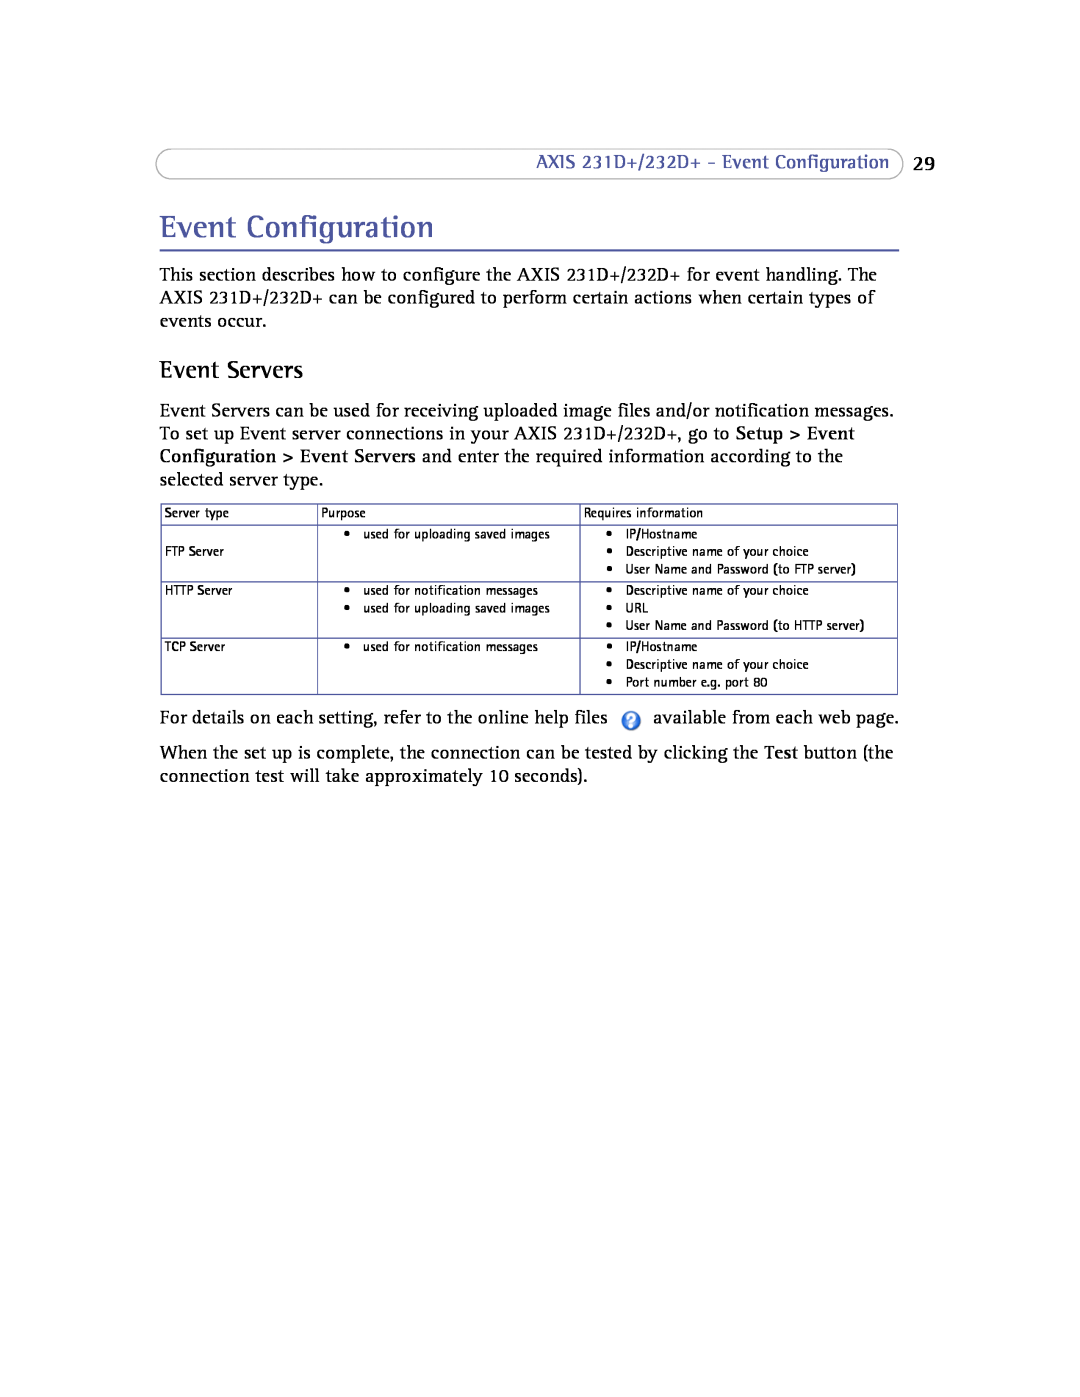 Axis Communications 232d+ user manual Event Servers, AXIS 231D+/232D+ - Event Configuration 